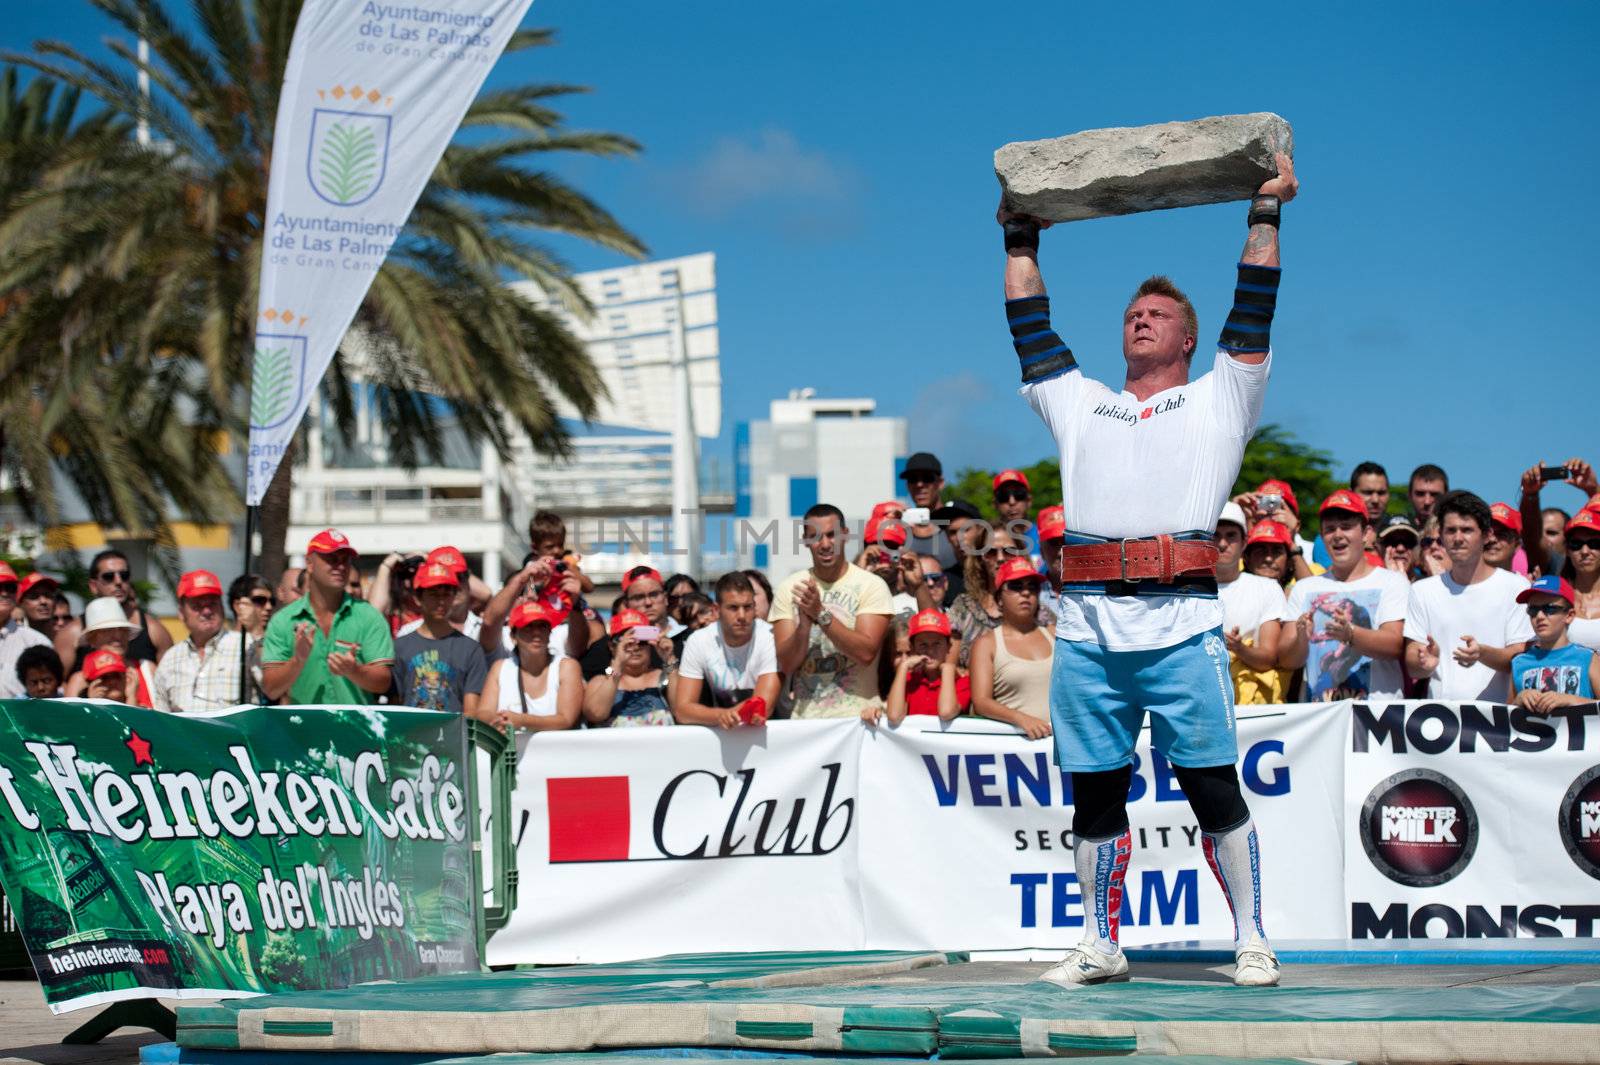 CANARY ISLANDS – SEPTEMBER 03: Tomi Lotta from Finland lifting a heavy stone during Strongman Champions League in Las Palmas September 03, 2011 in Canary Islands, Spain